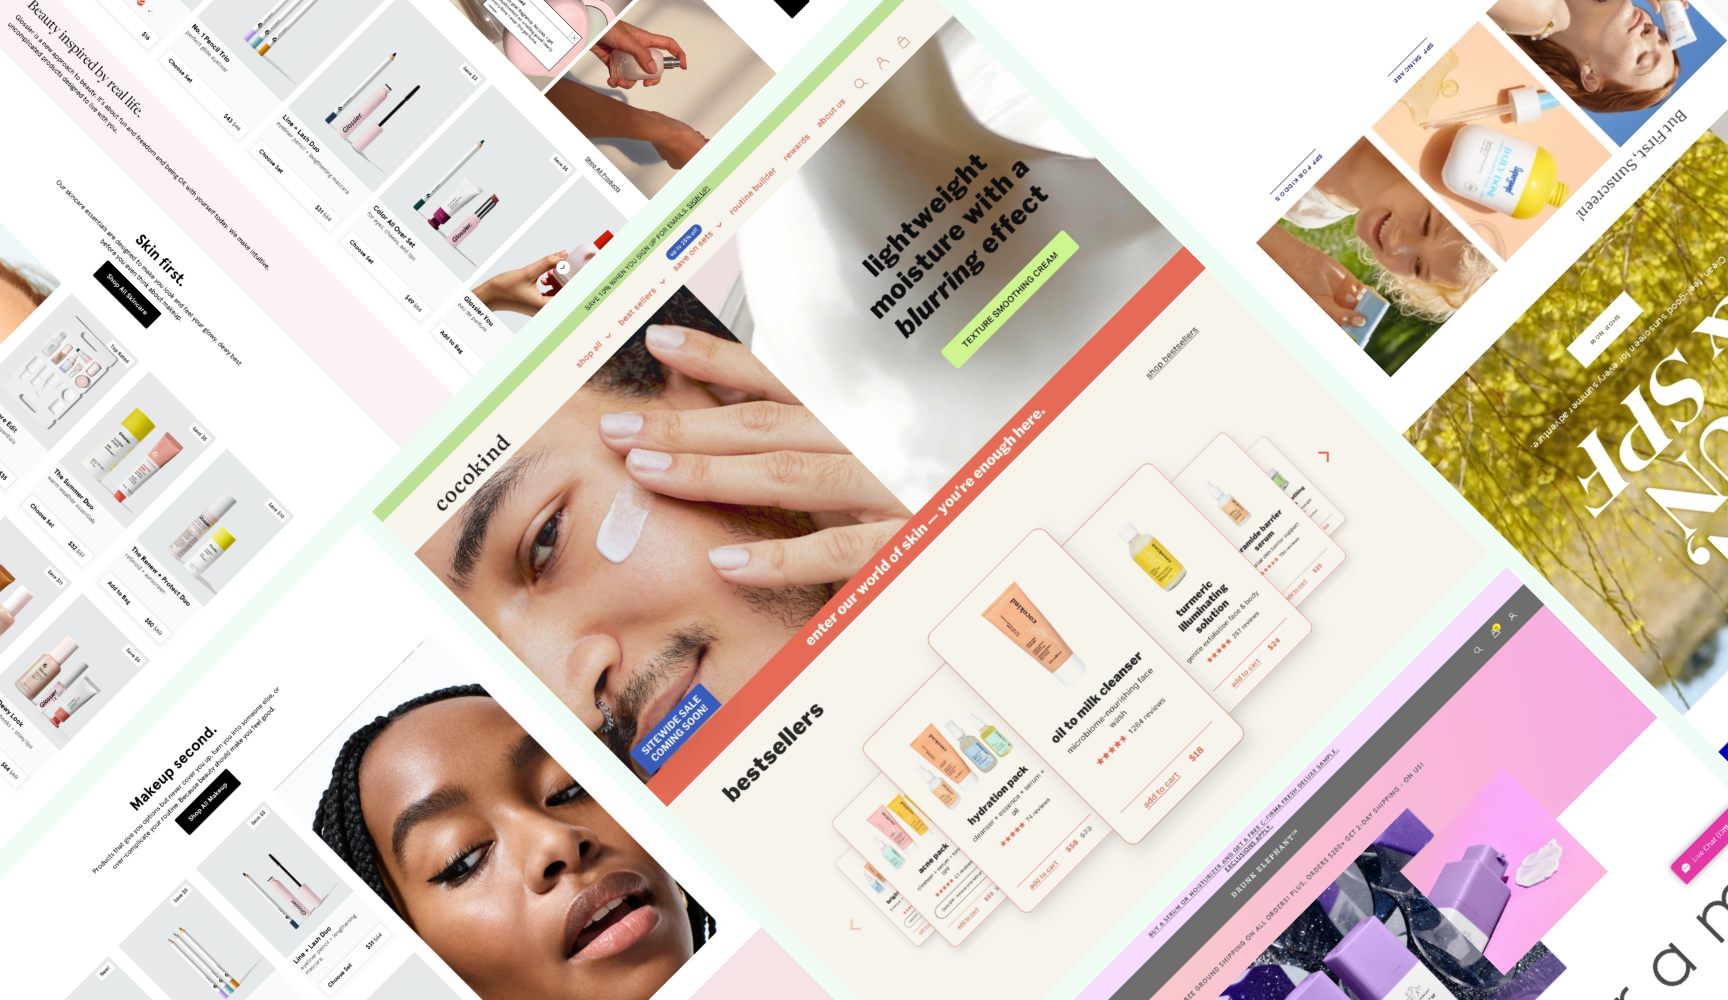 Must Haves for Your Skincare Storefront: We Analyzed 200 Brands to Help Find What You Need on Your Shopify Storefront